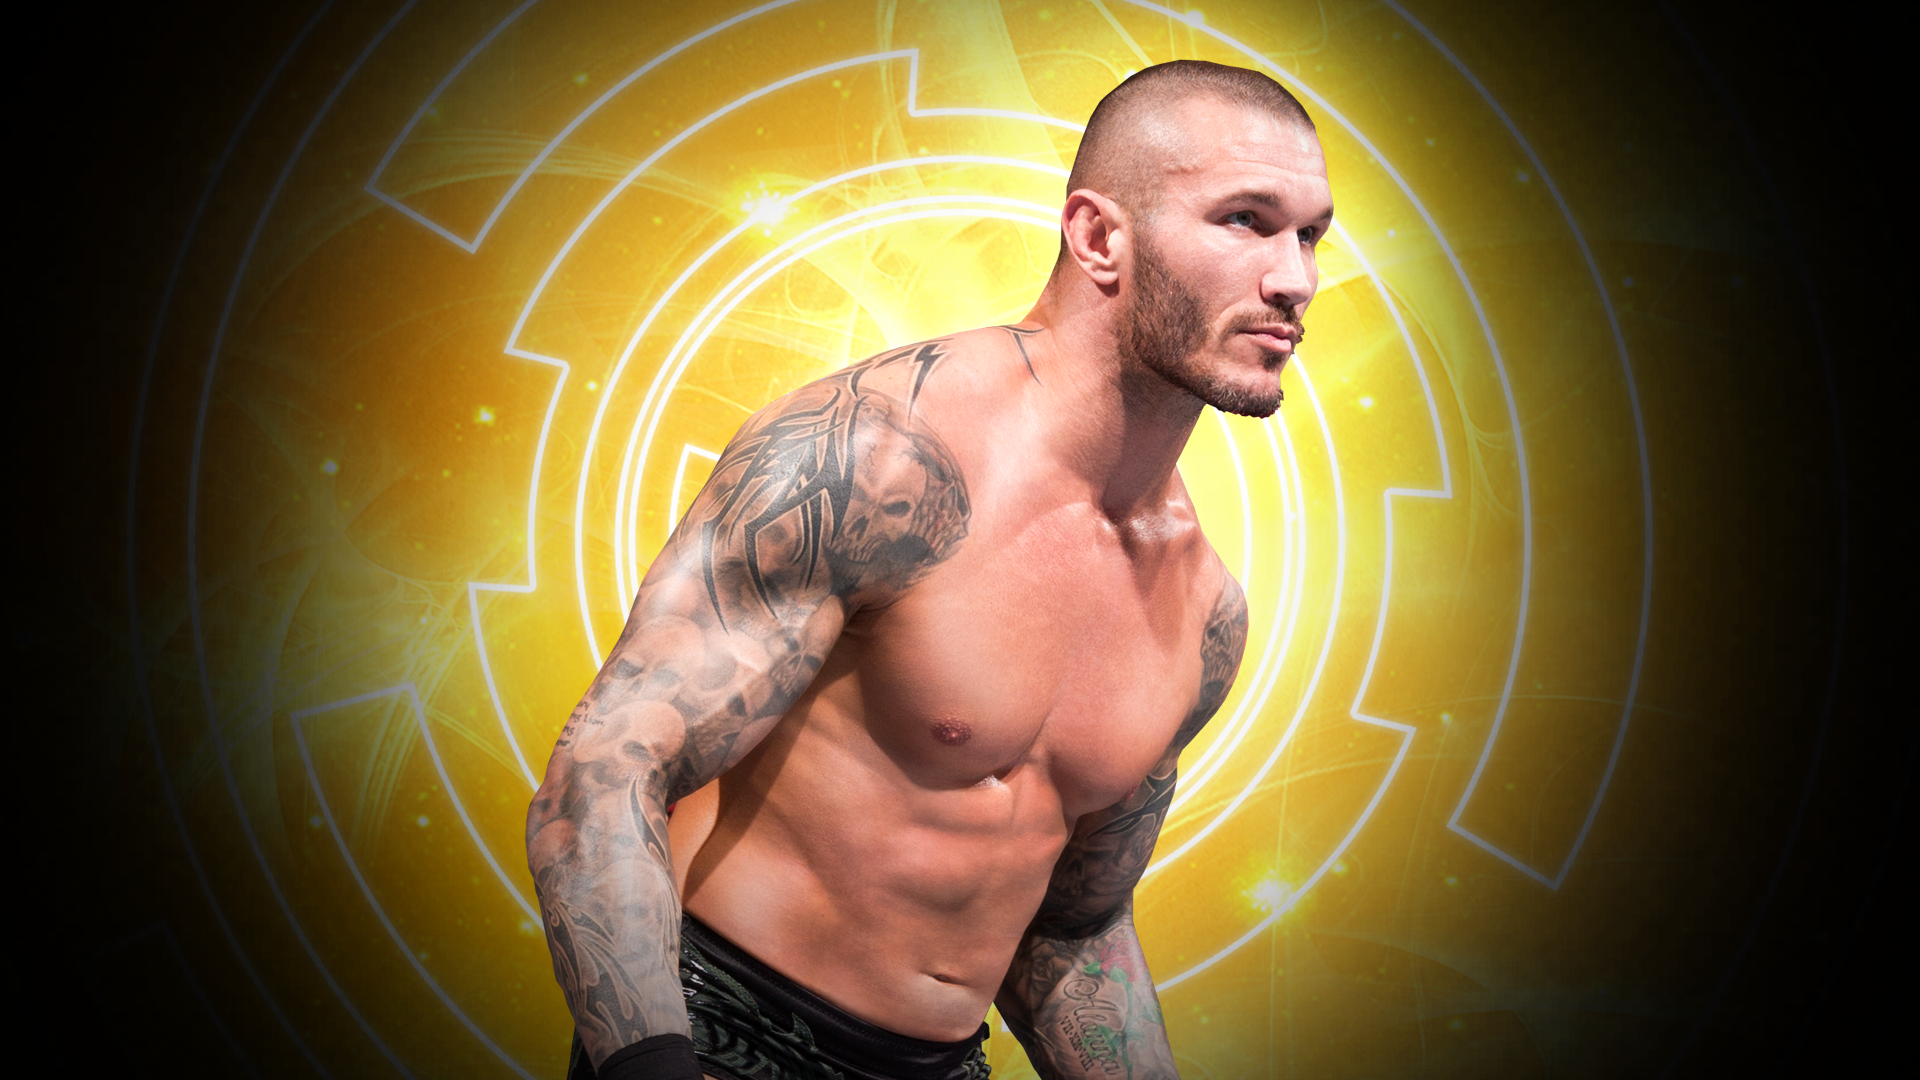 Icon for WWE Live Star